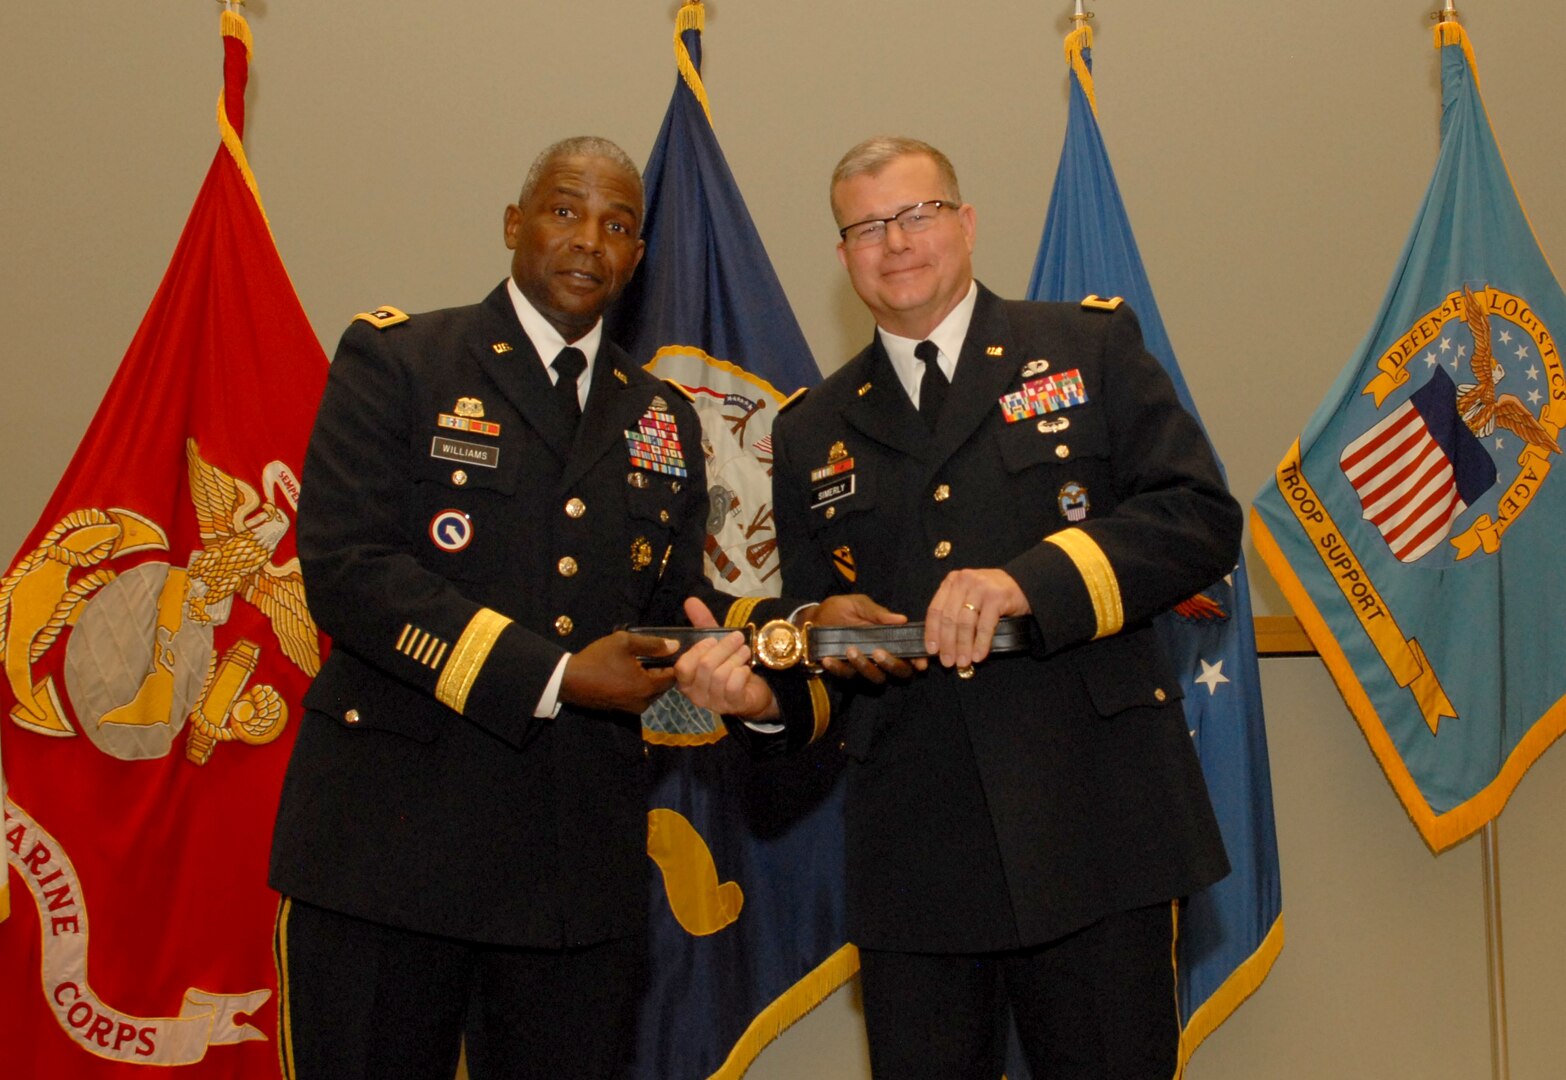 Troop Support commander promoted to brigadier general